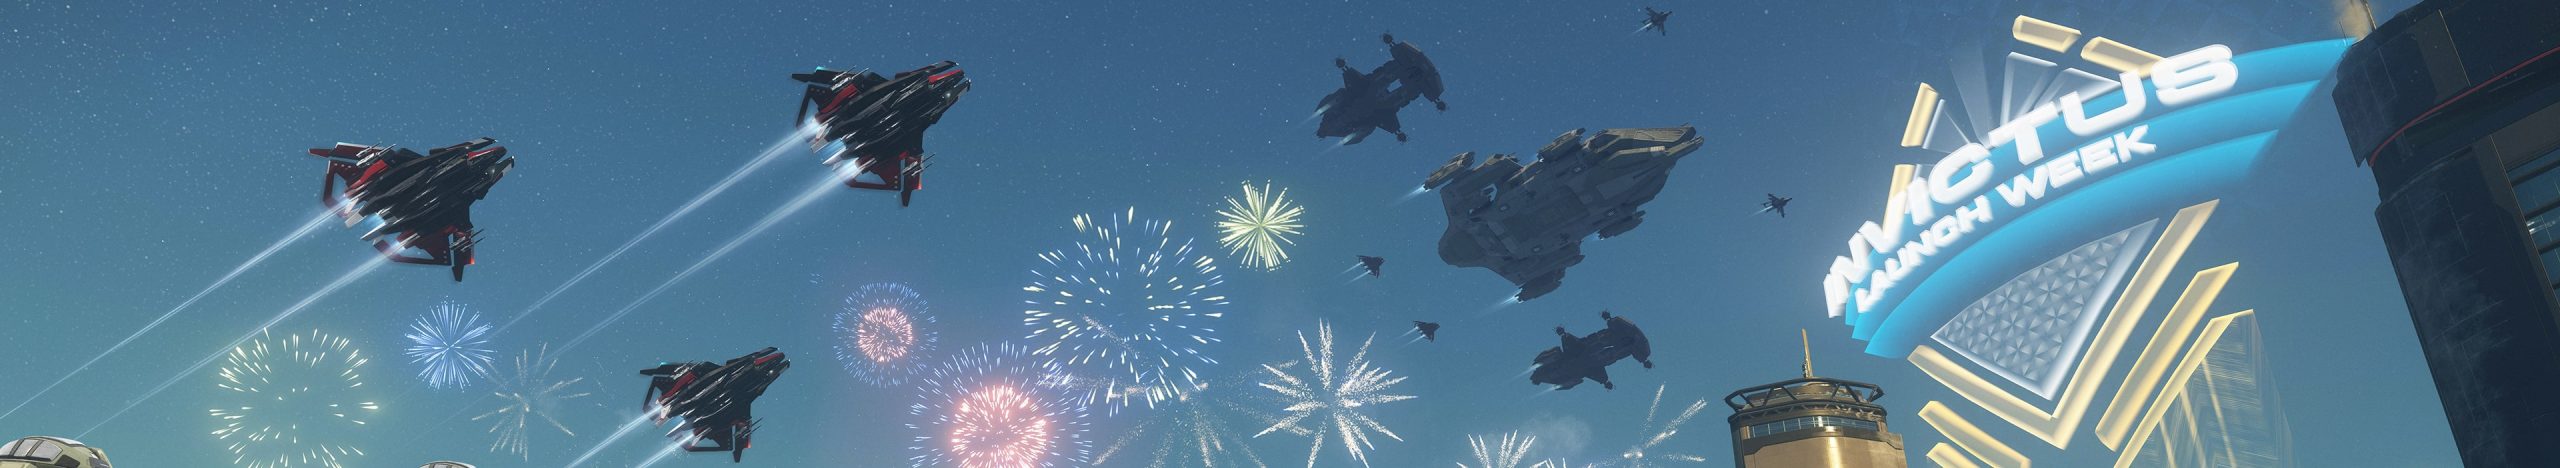 Star Citizen February Free Fly Event Now Live Until Thursday 25th